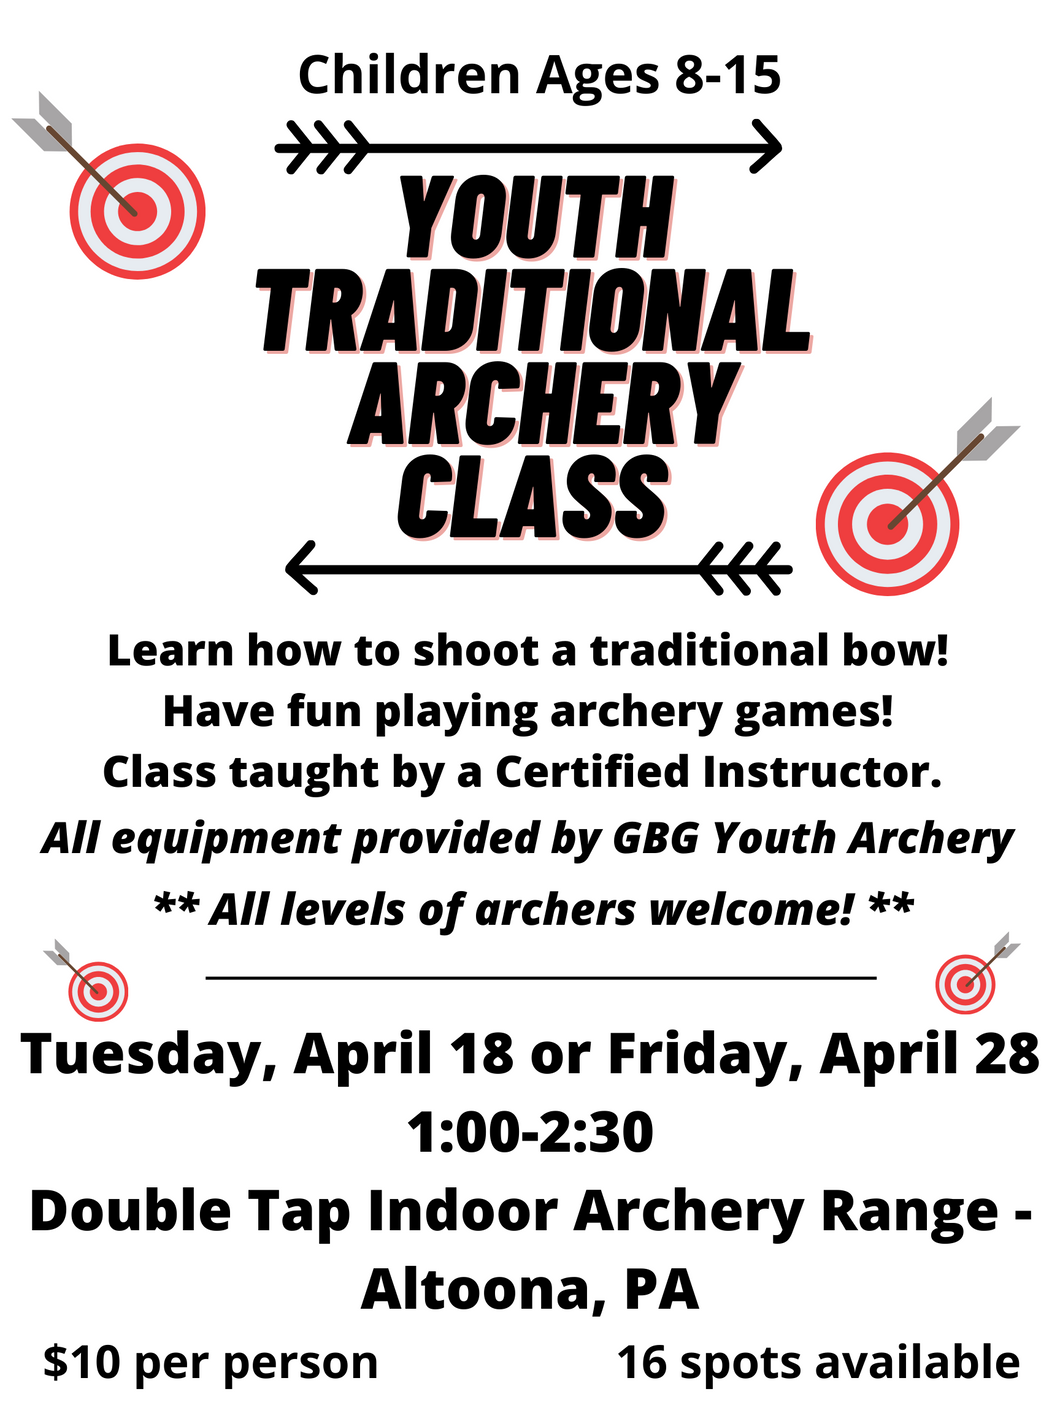 Youth Traditional Archery Class - April 28 -1:00 to 2:30pm